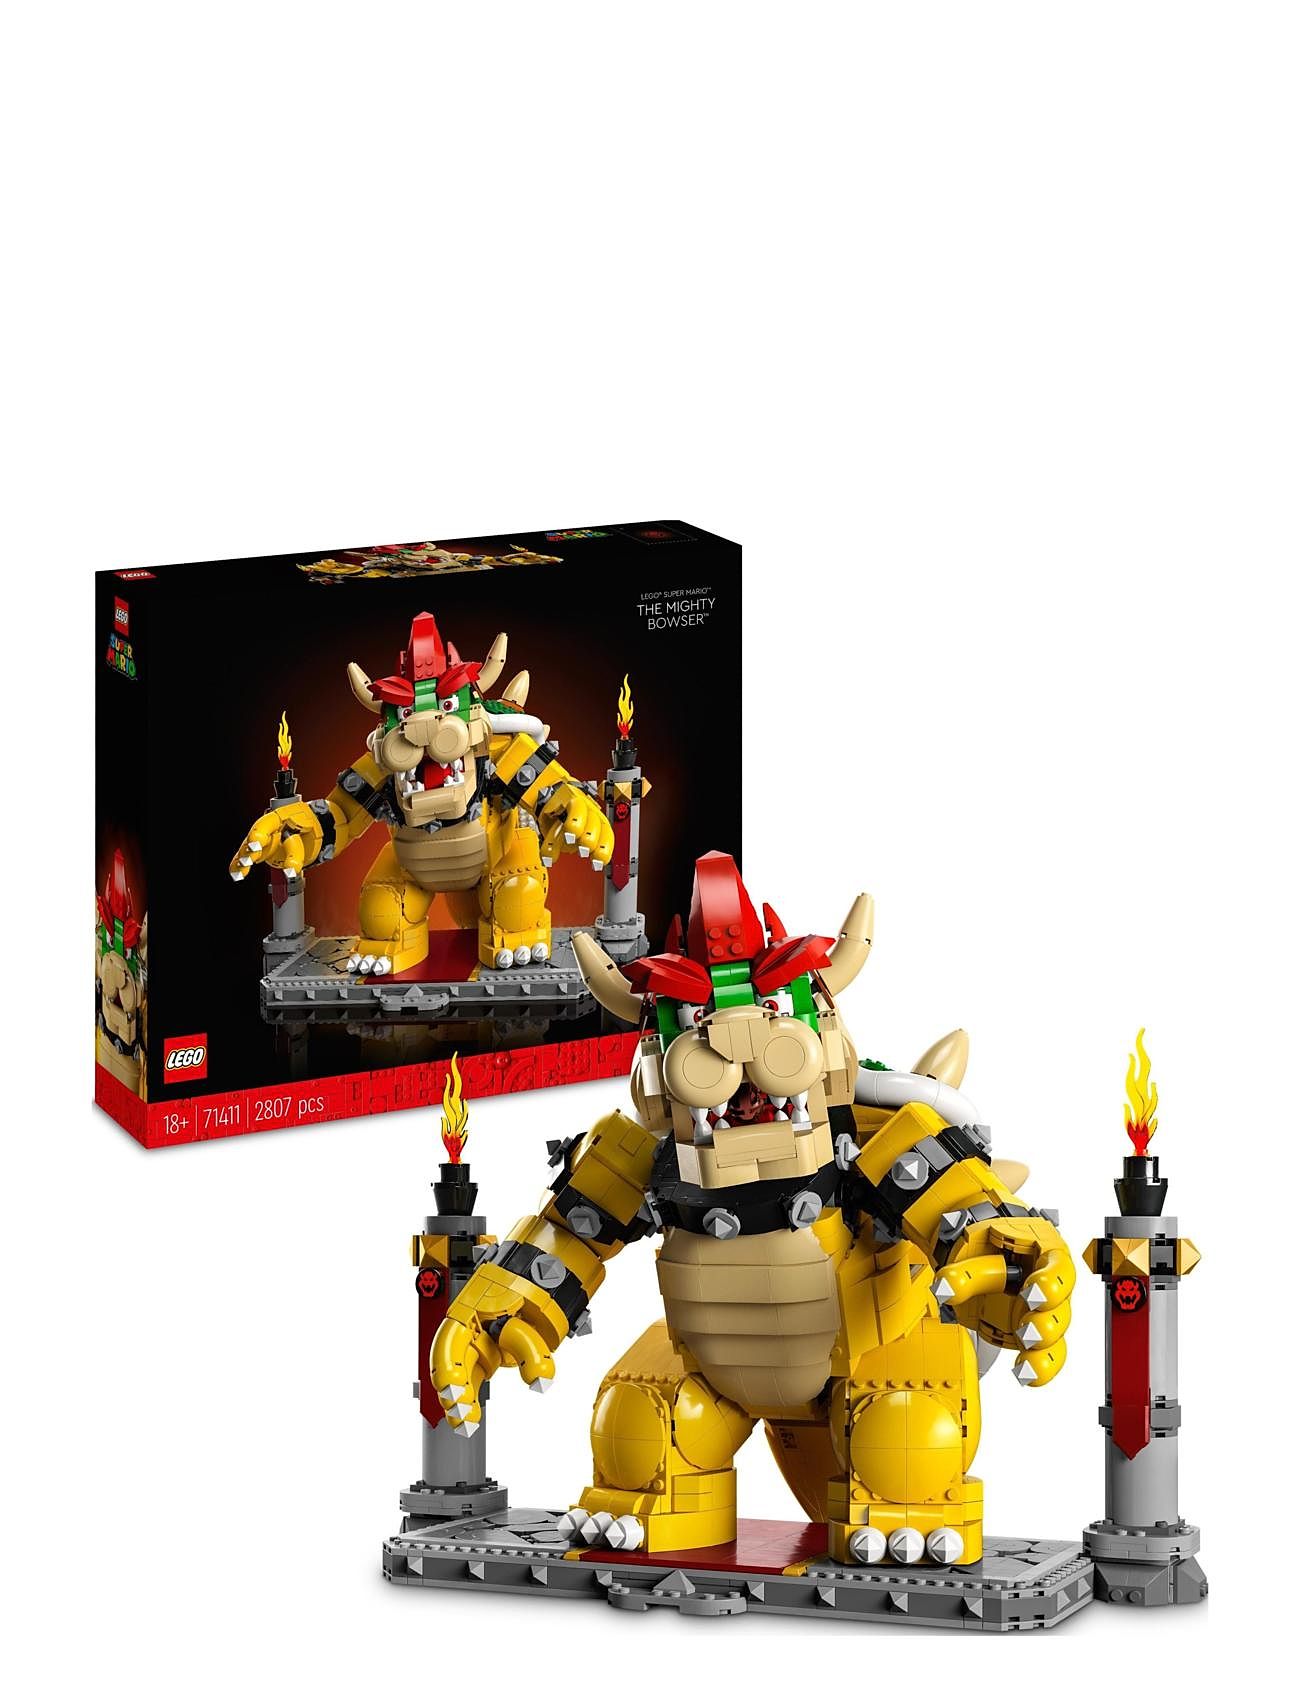 The Mighty Bowser Collectible Figure Toys Lego Toys Lego super Mario Multi/patterned LEGO